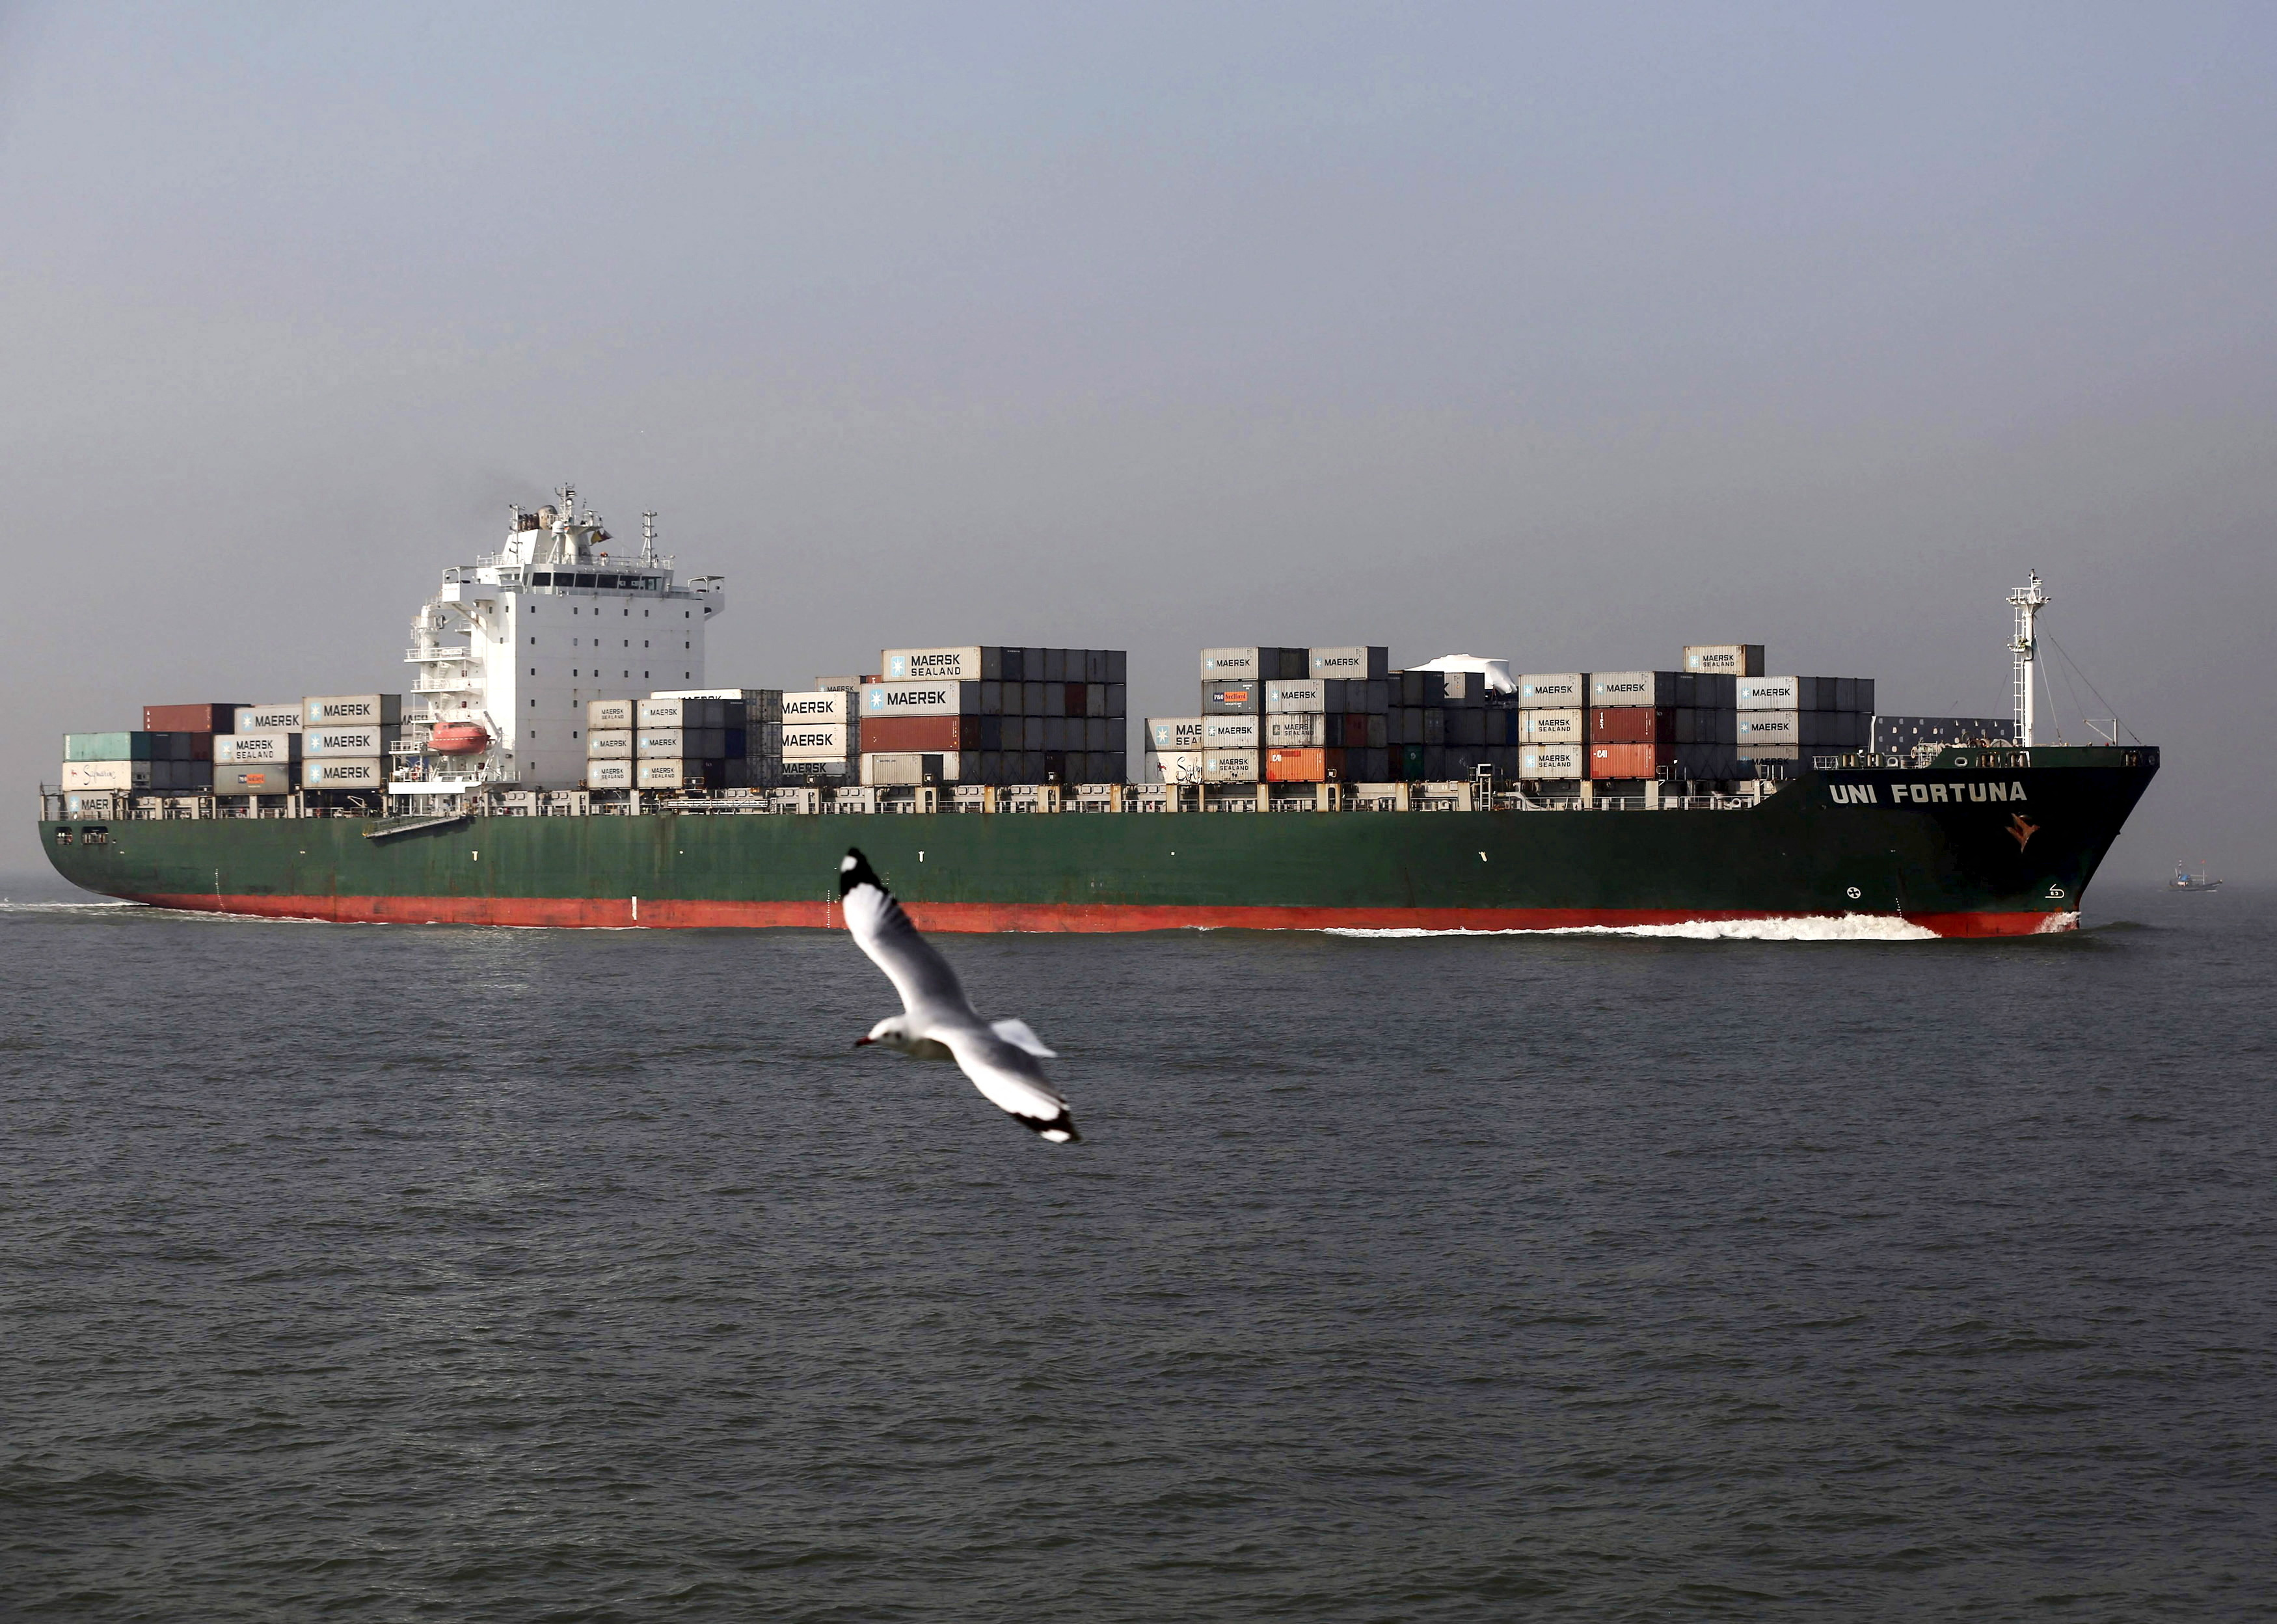 A seagull flies past a cargo container ship off the coast of Mumbai